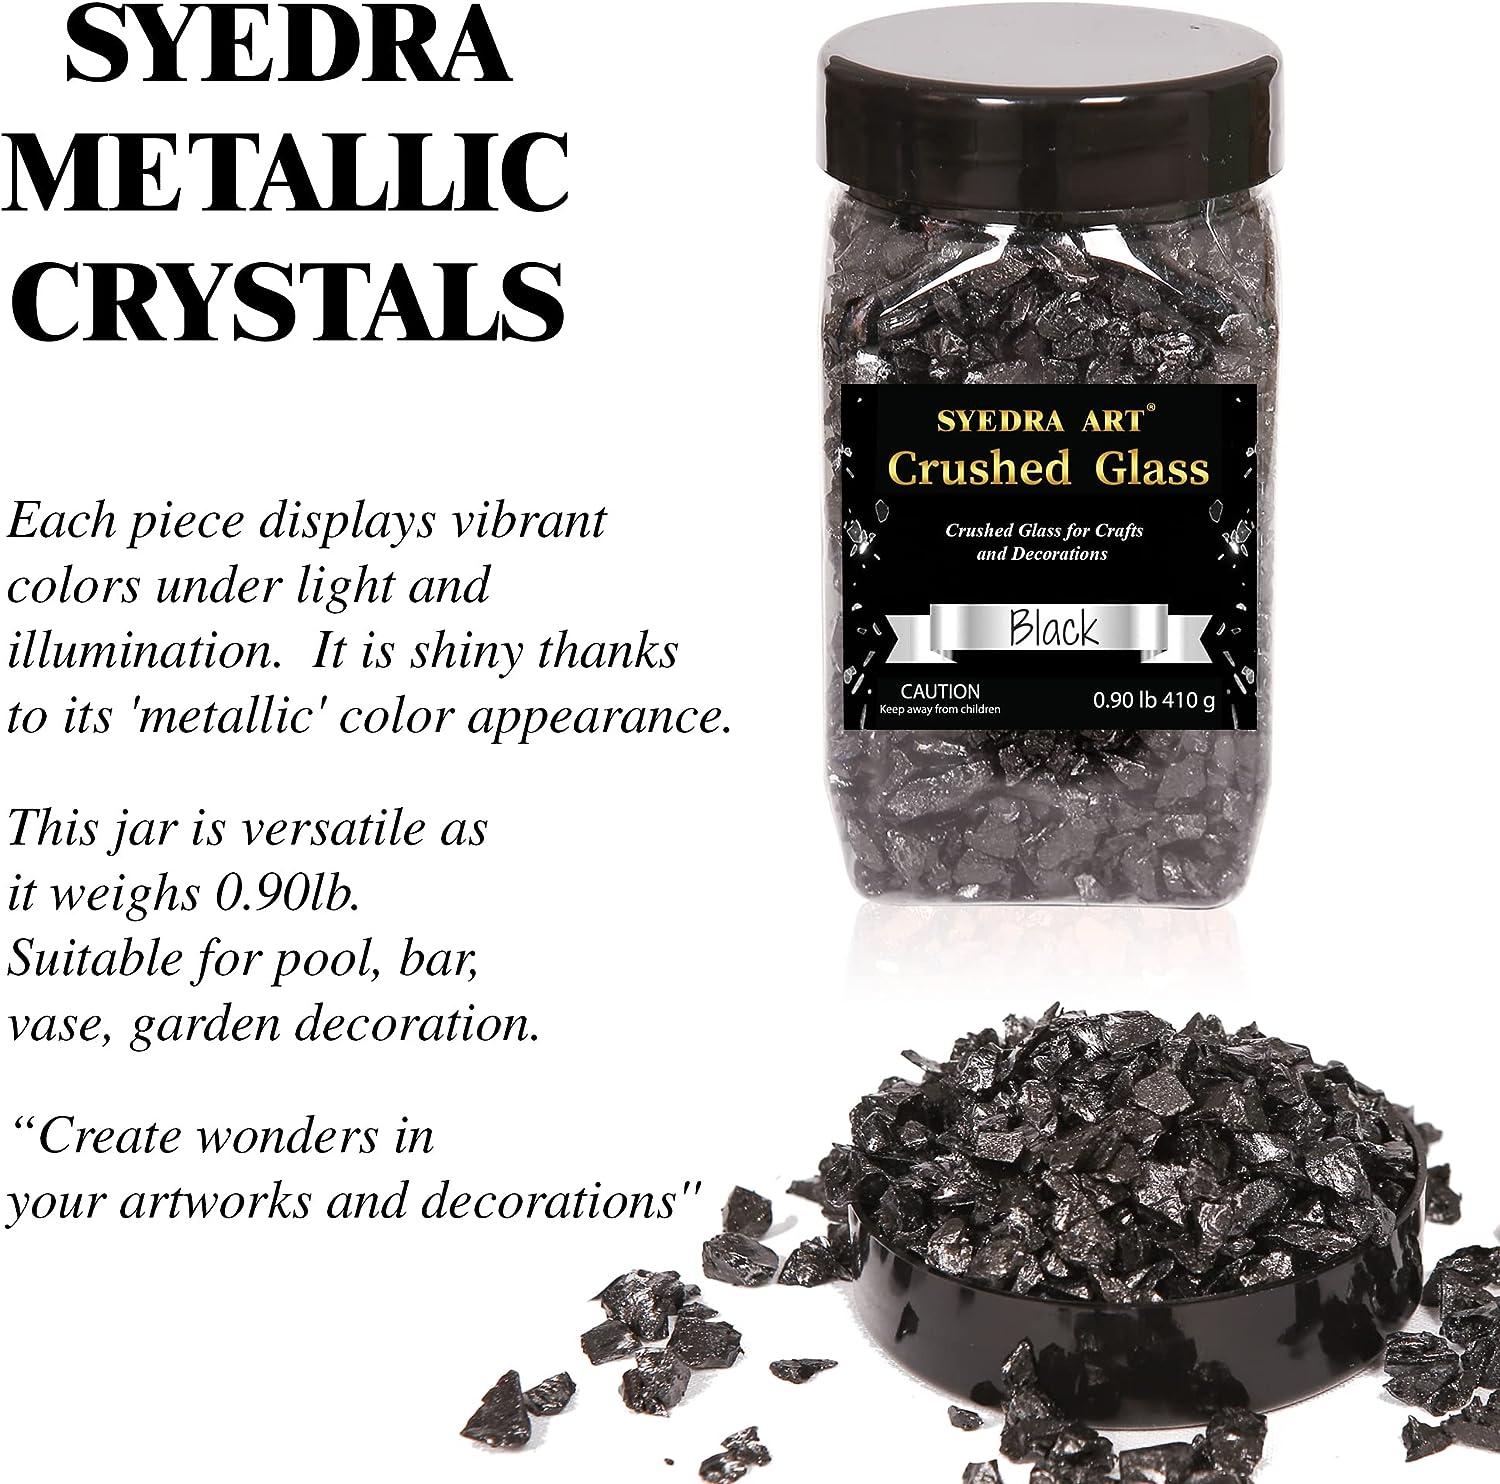 Syedra Art Syedra Crushed Glass for Crafts,Glitter Crushed High Luster Chips, Broken Glass Pieces, 3-6mm, 410g (Black)